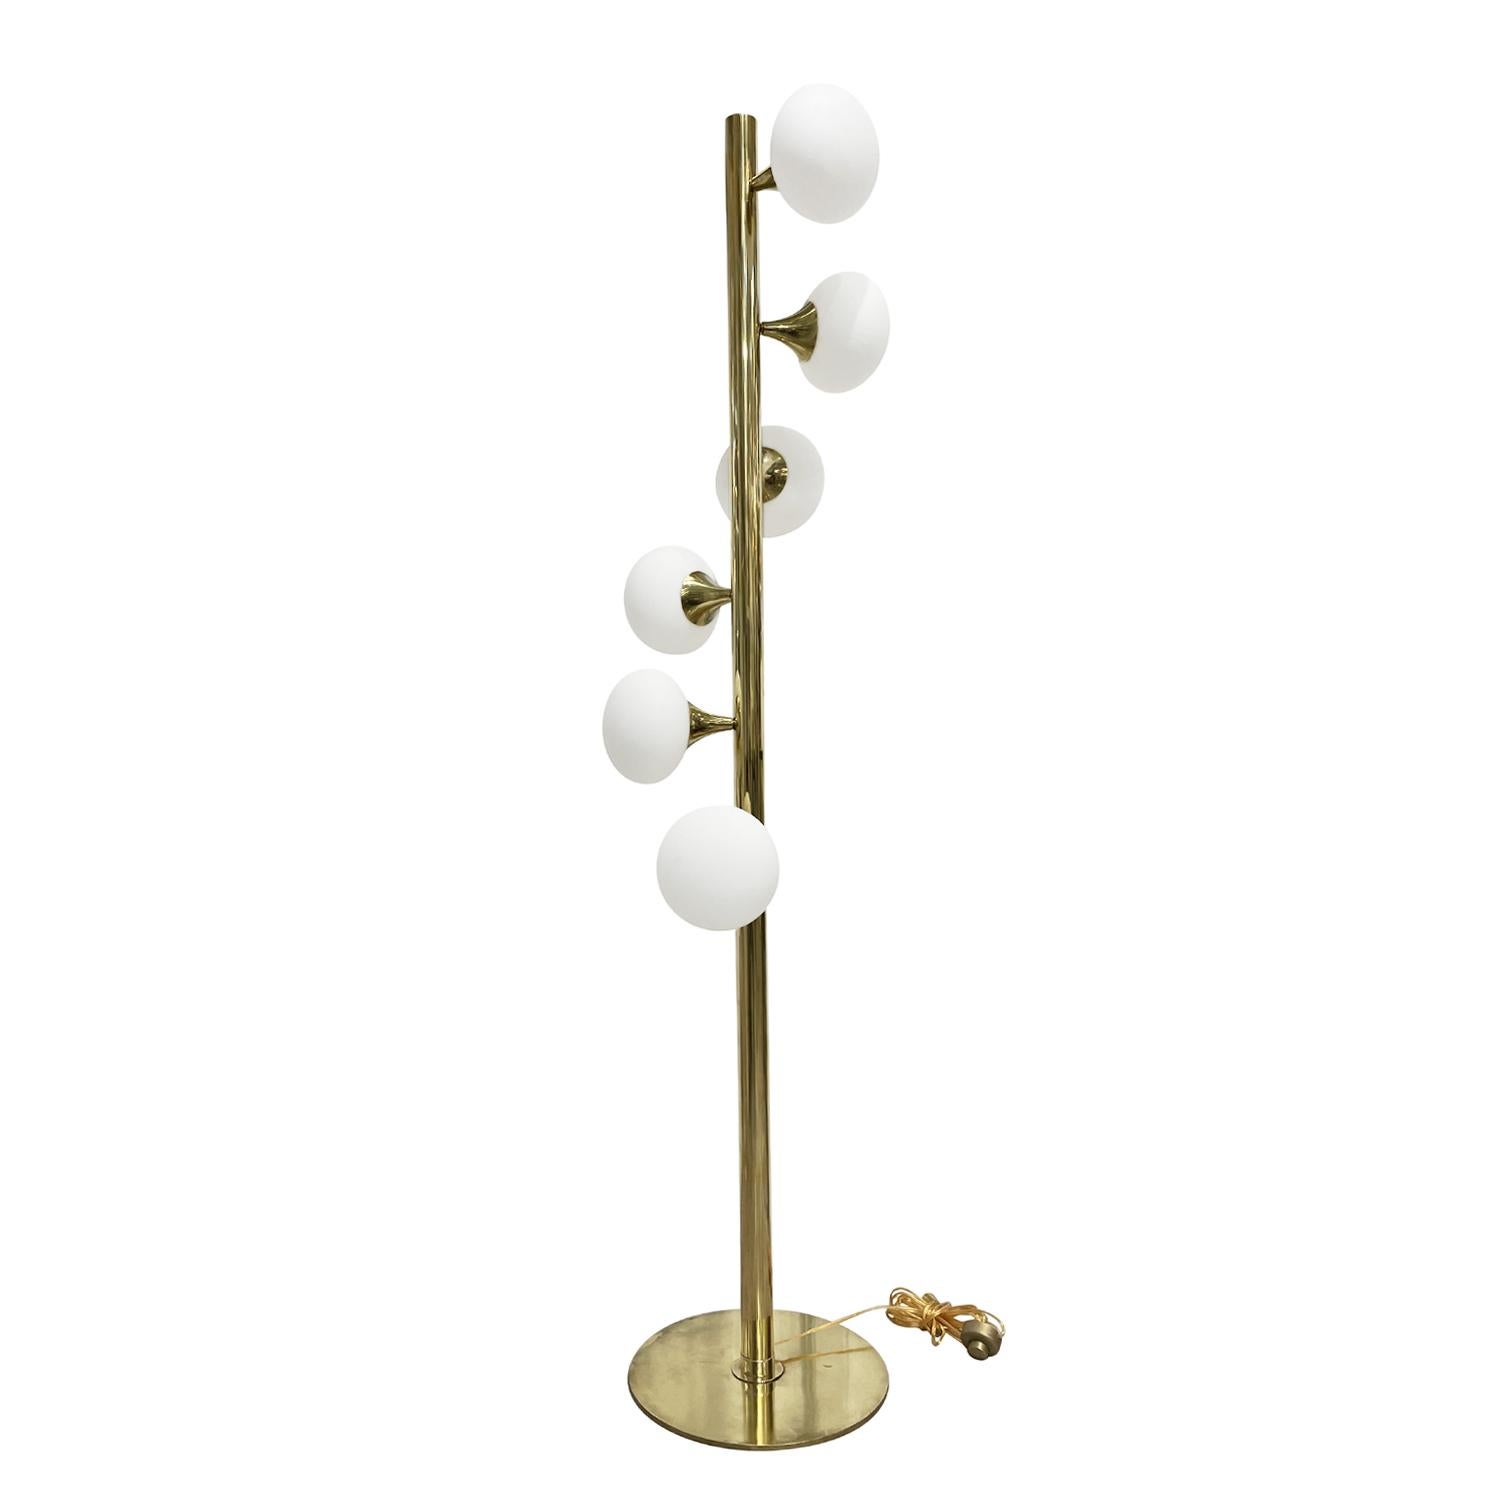 A gold, vintage Mid-Century Modern Italian floor lamp made of hand crafted polished brass, designed and produced by Stilnovo, in good condition. The floor lamp is composed with six frosted opaline glass shades, each of the glass lights are halted by